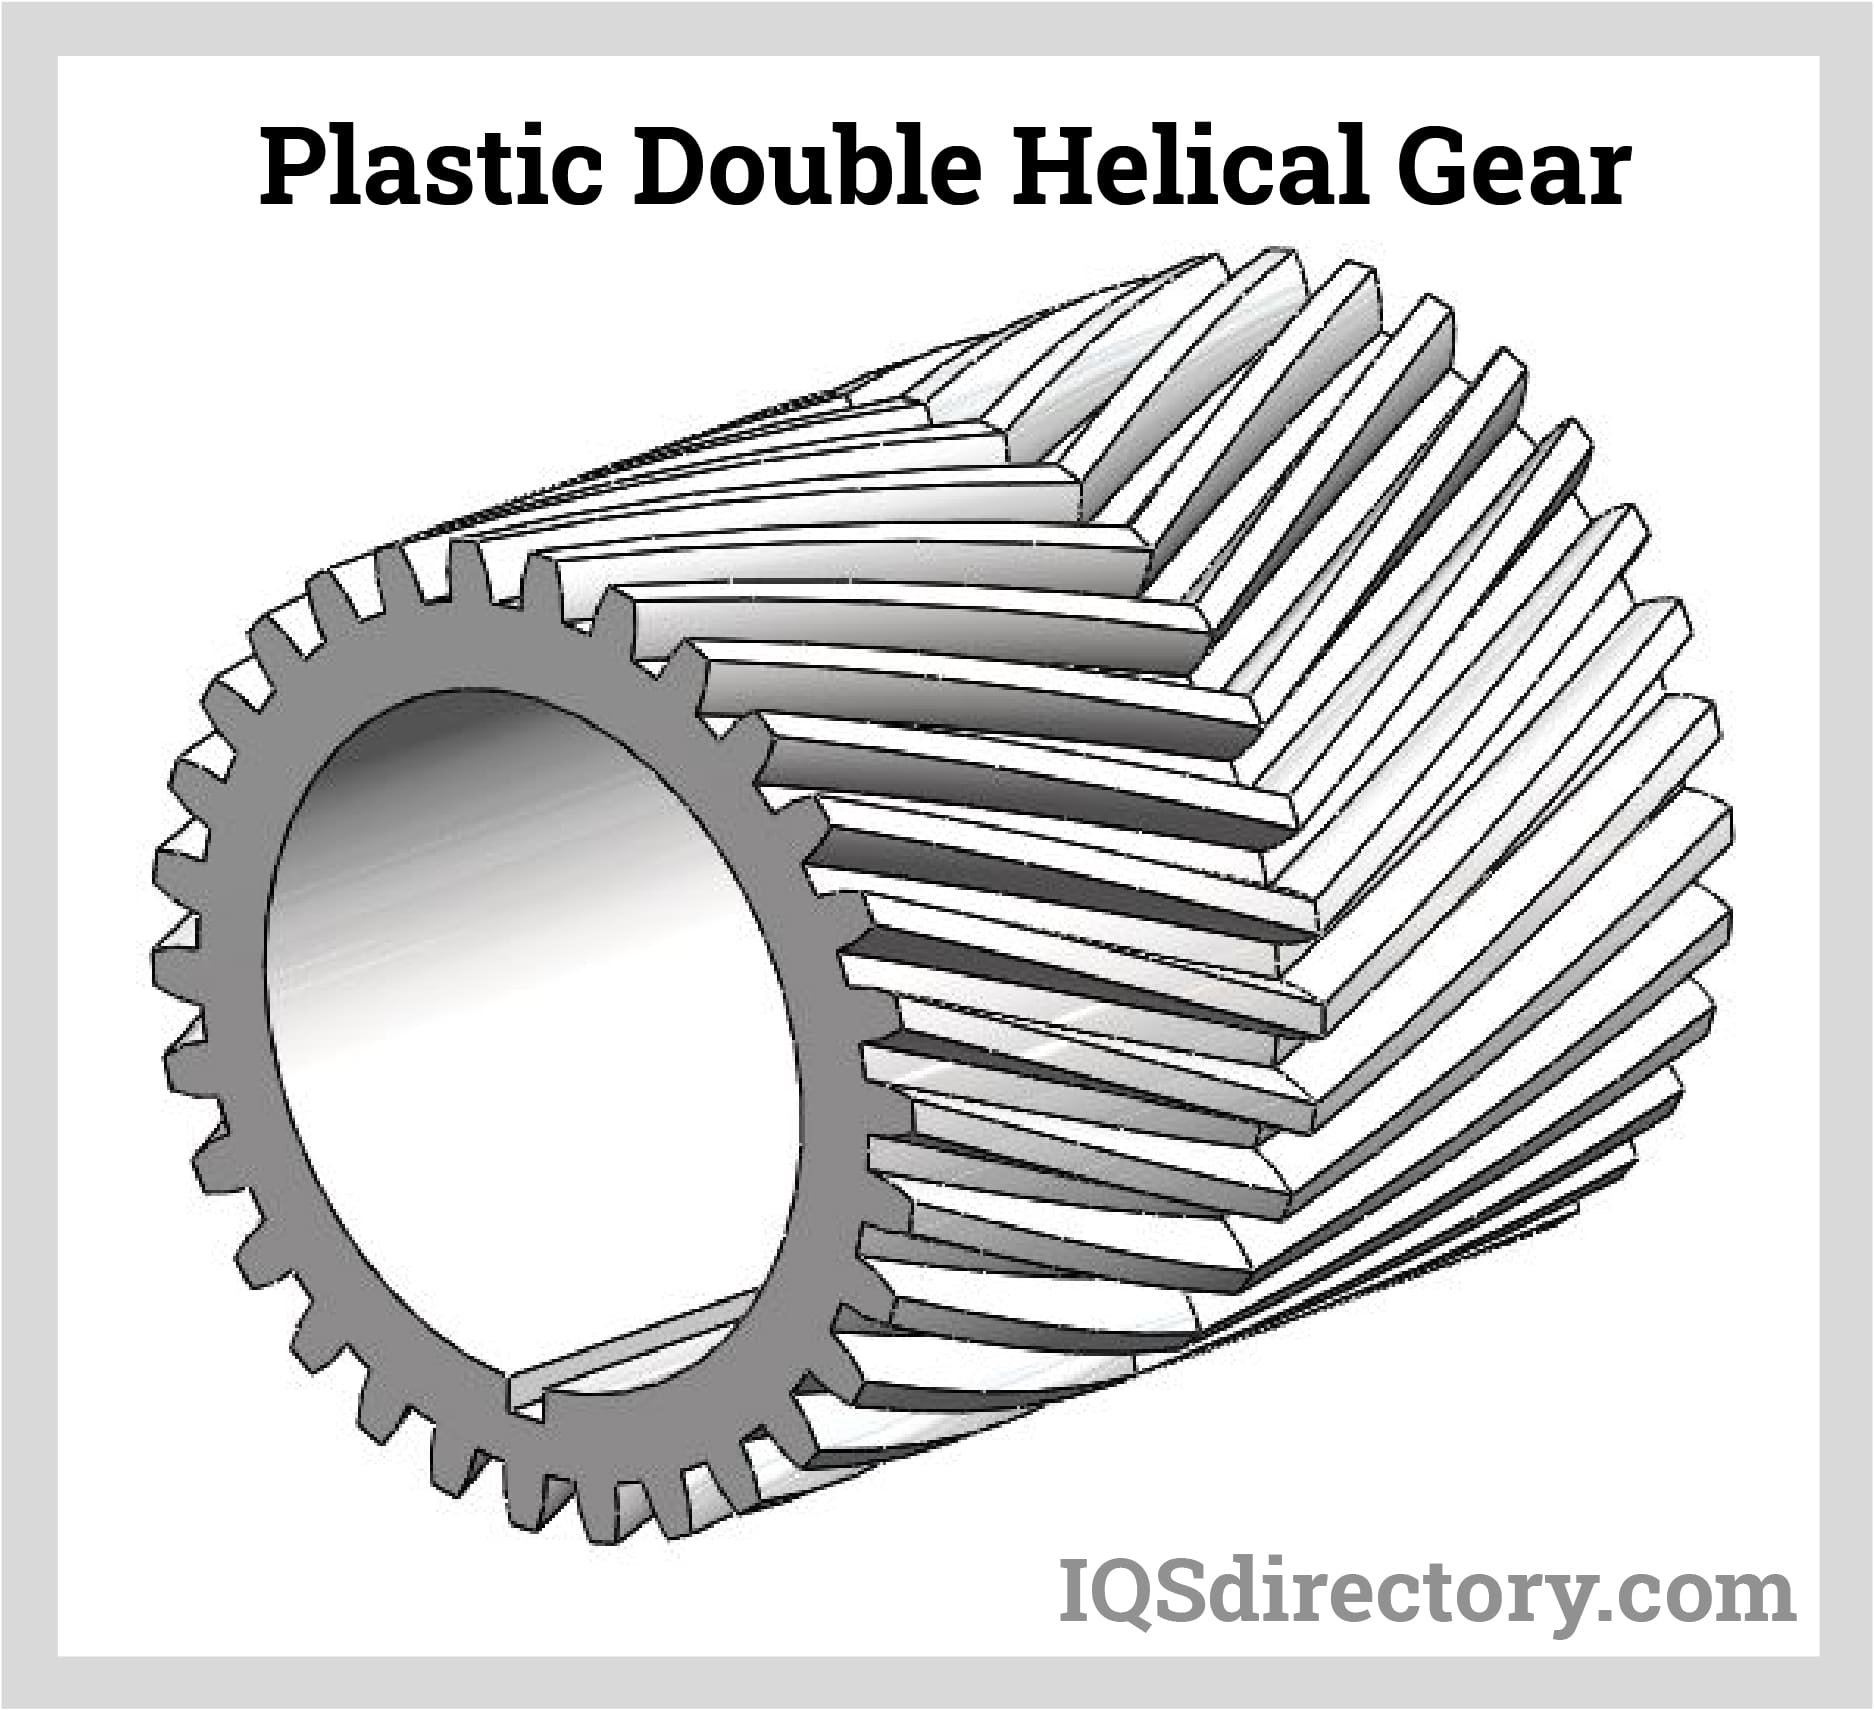 Plastic Double Helical Gear